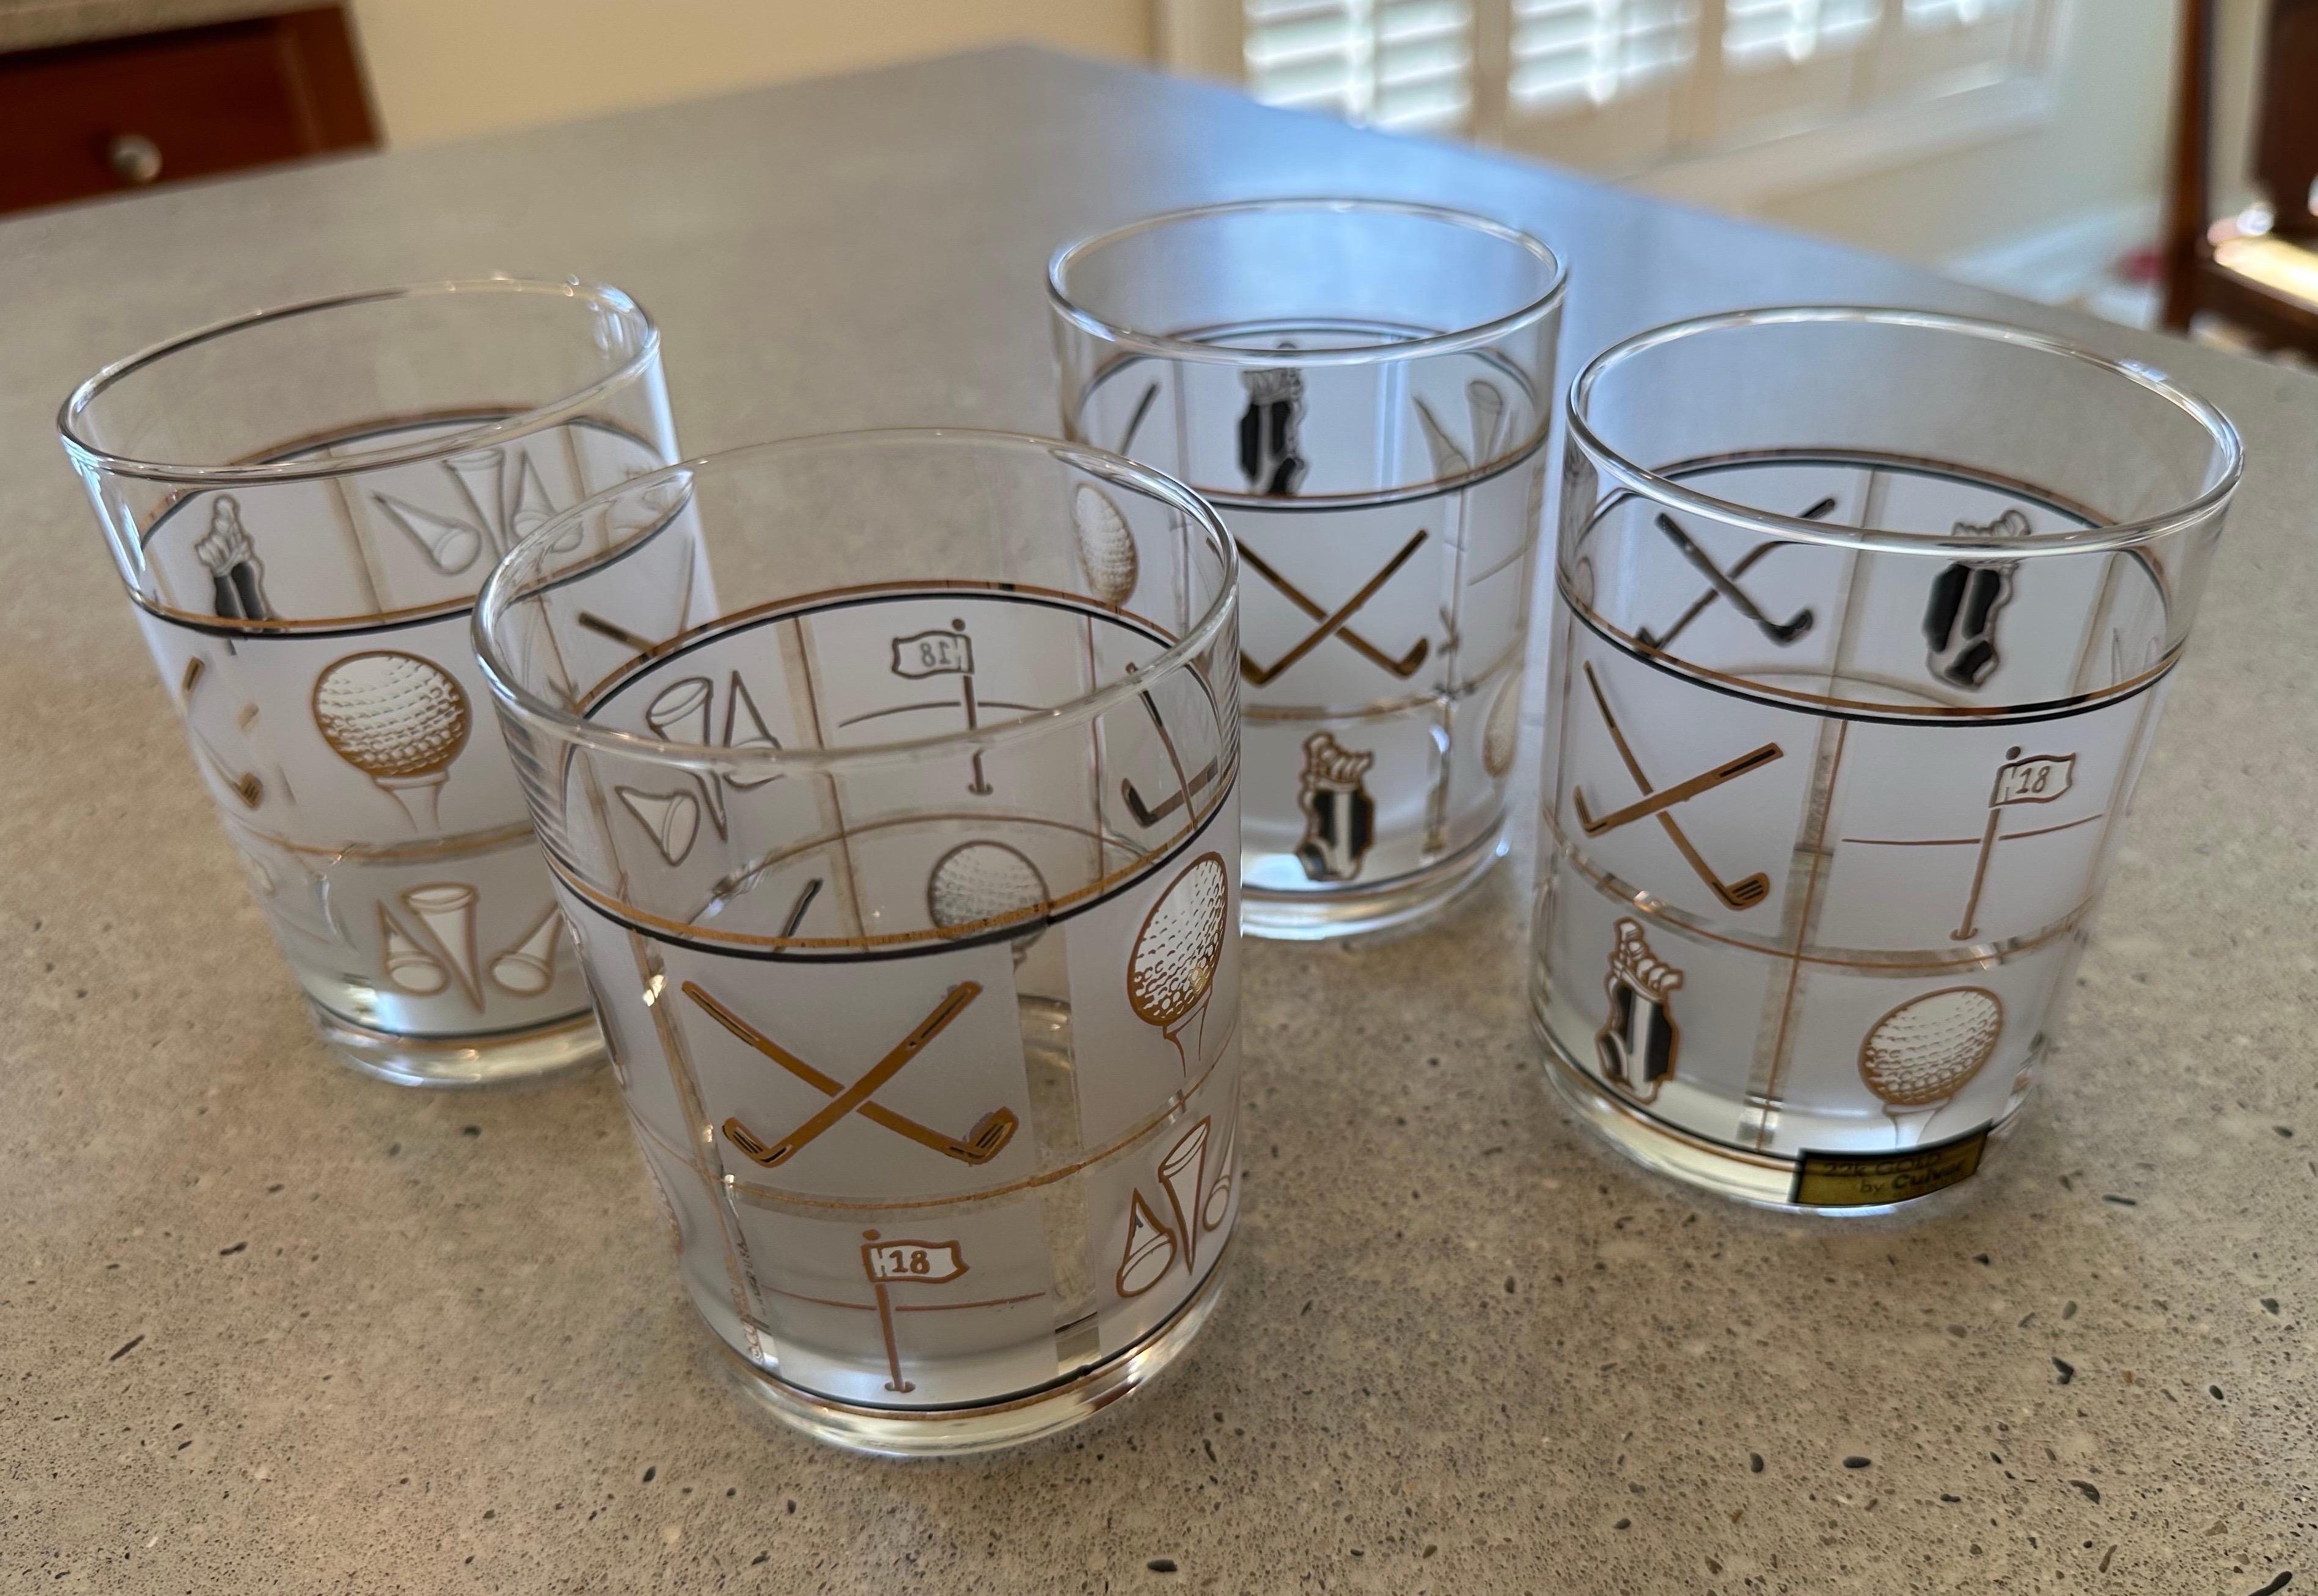 American Culver Fairway 22k Gold Decorated Glasses - 4 Rocks and 4 High Ball/Collins  For Sale